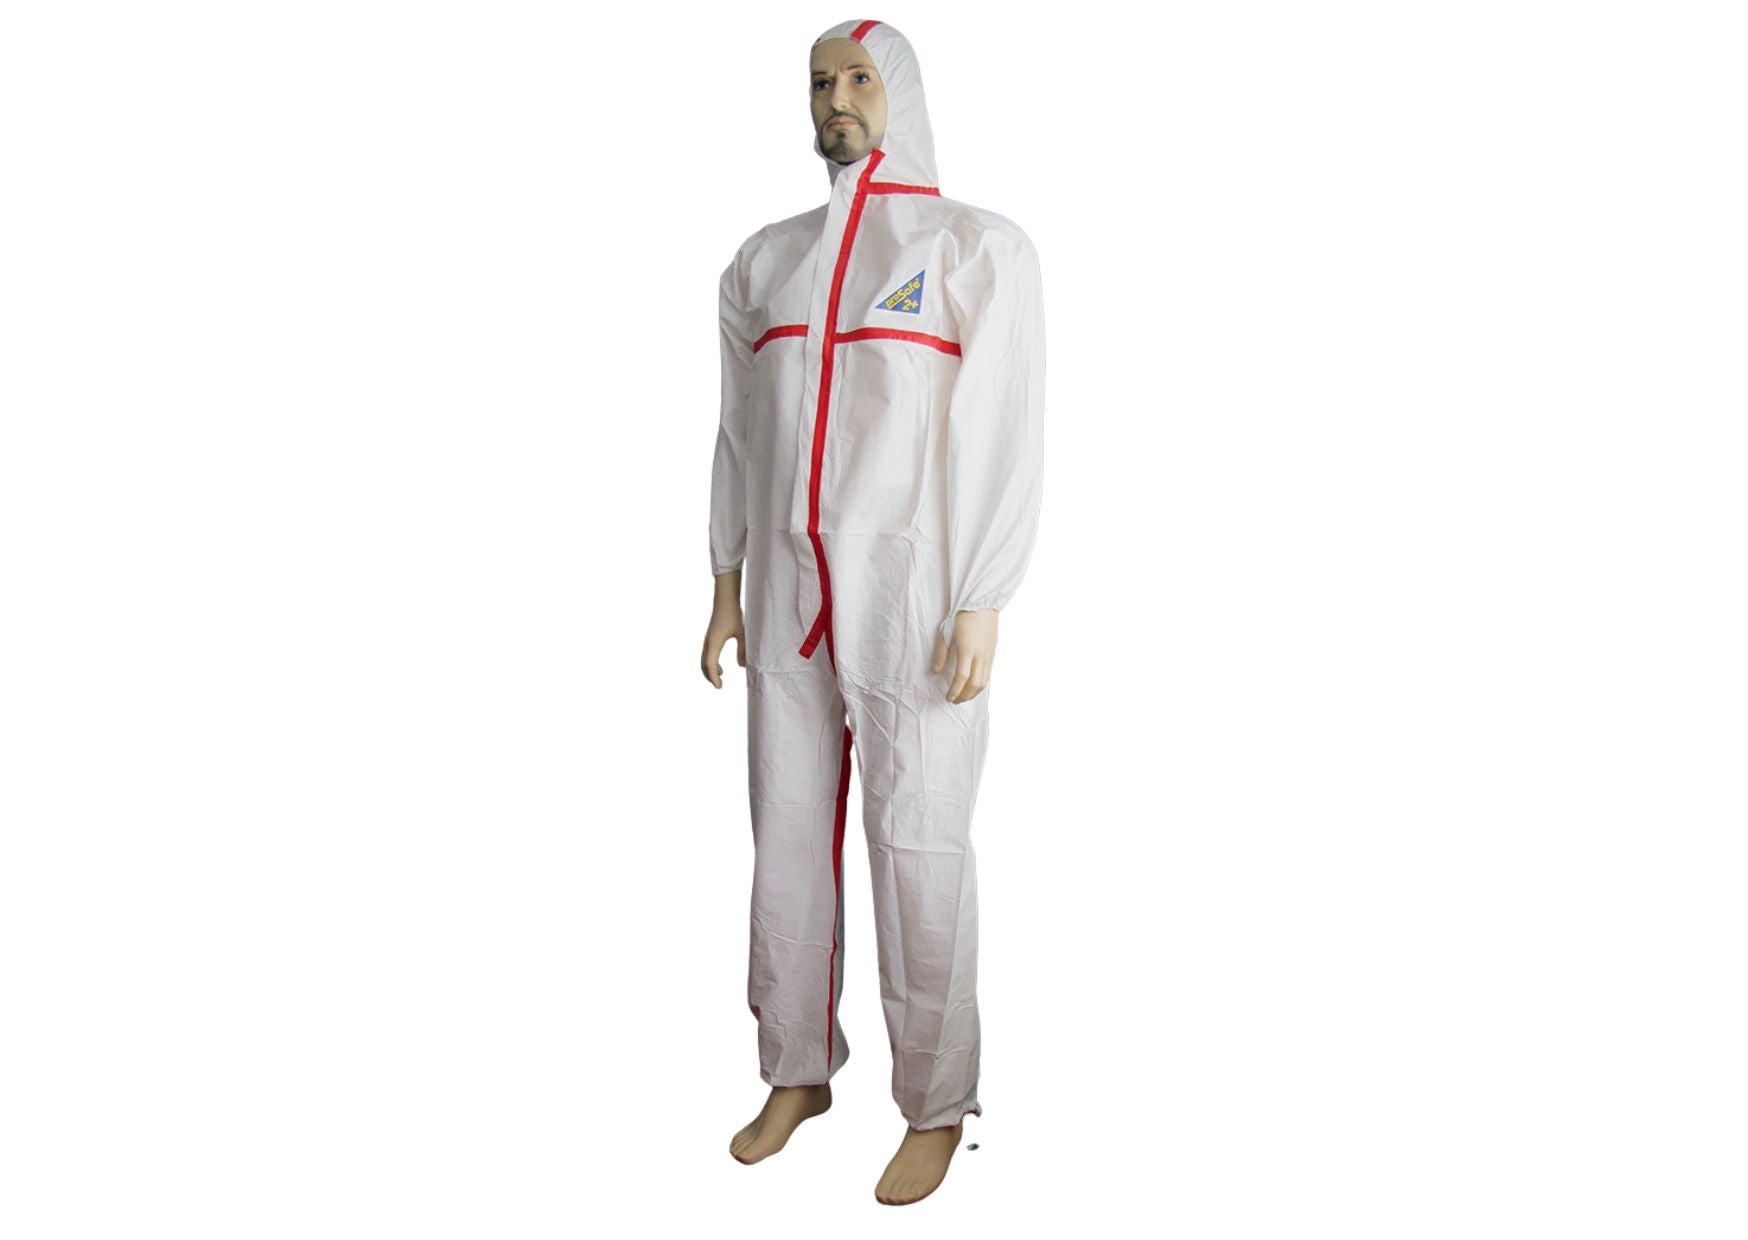 Full protective suit with hood, color white